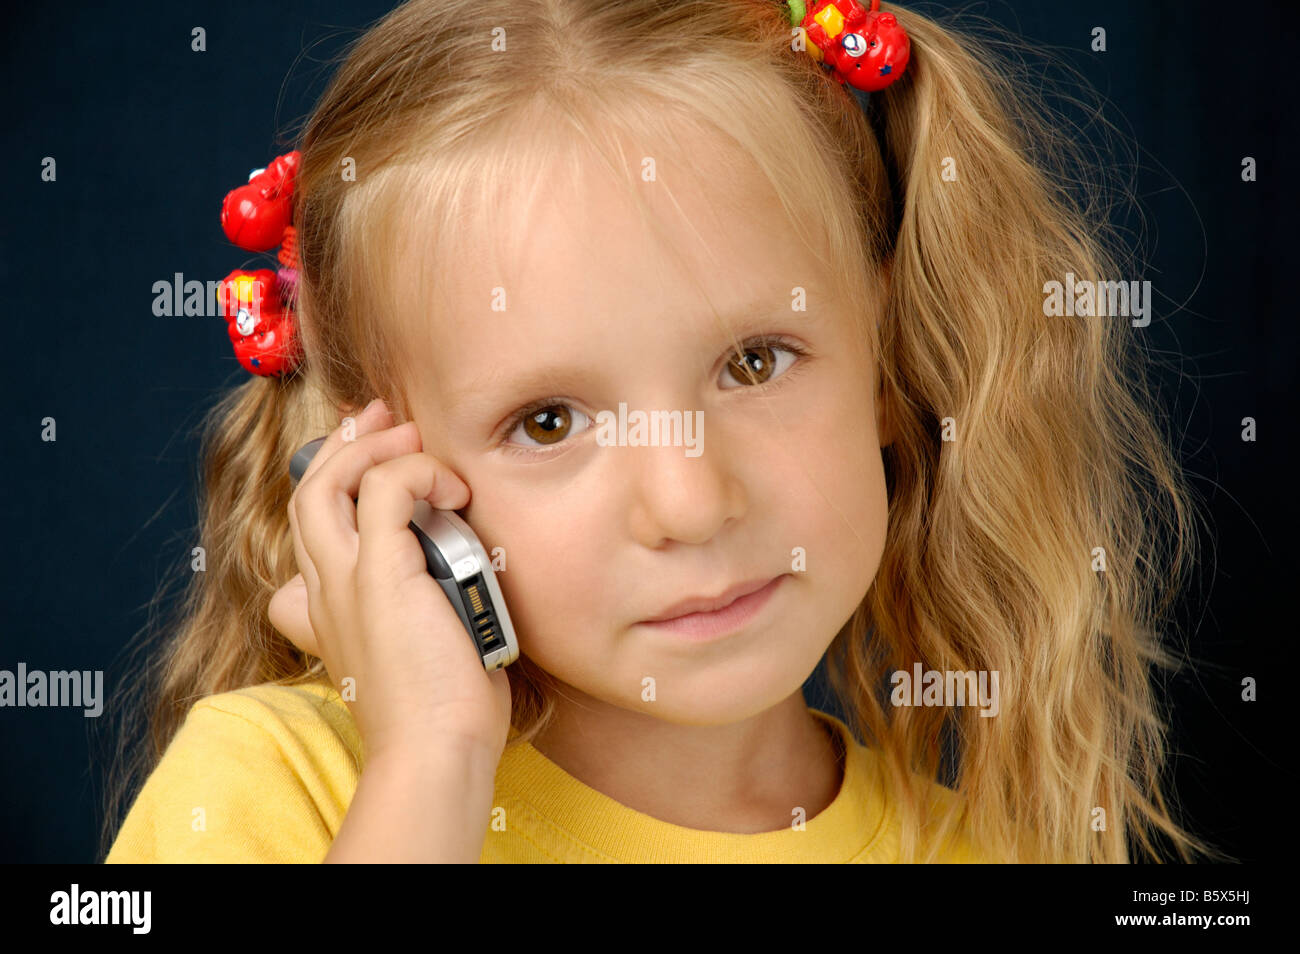 Little girl with cell phone Banque D'Images